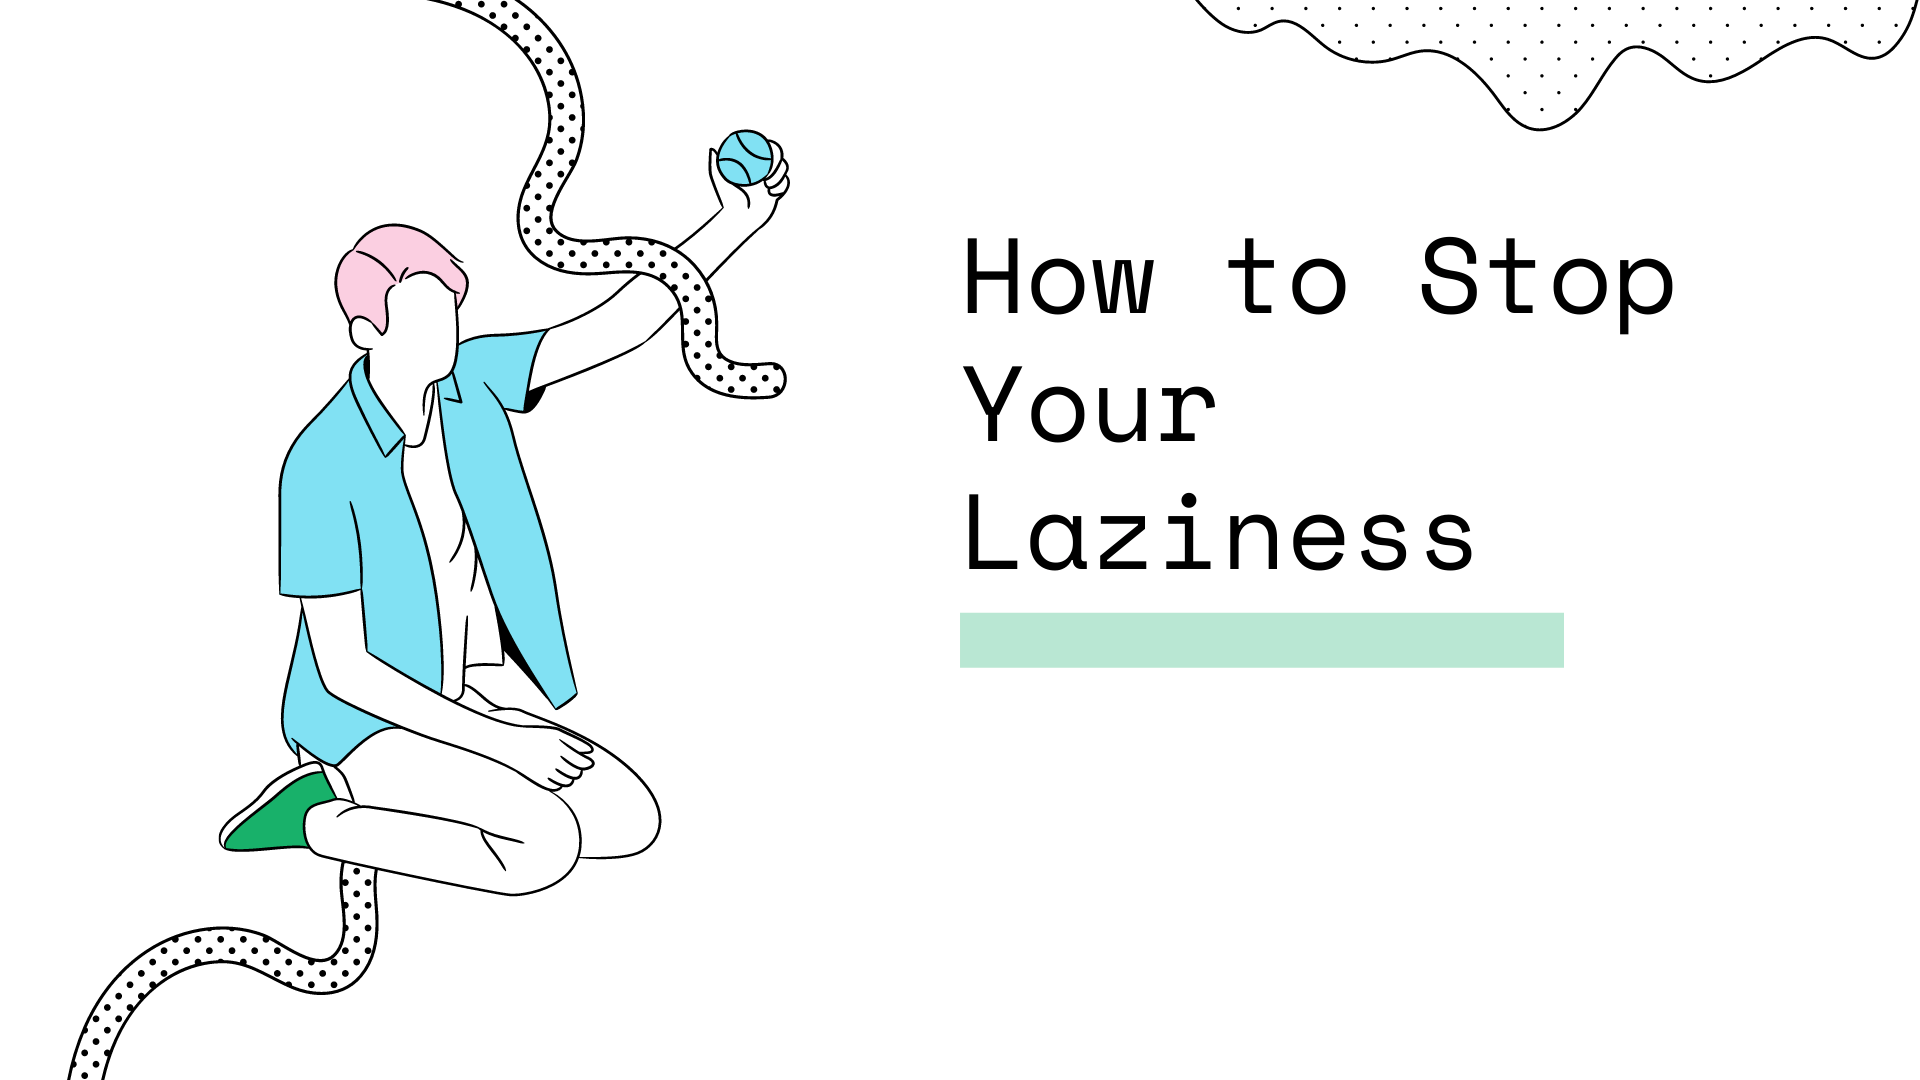 How to Stop Your Laziness